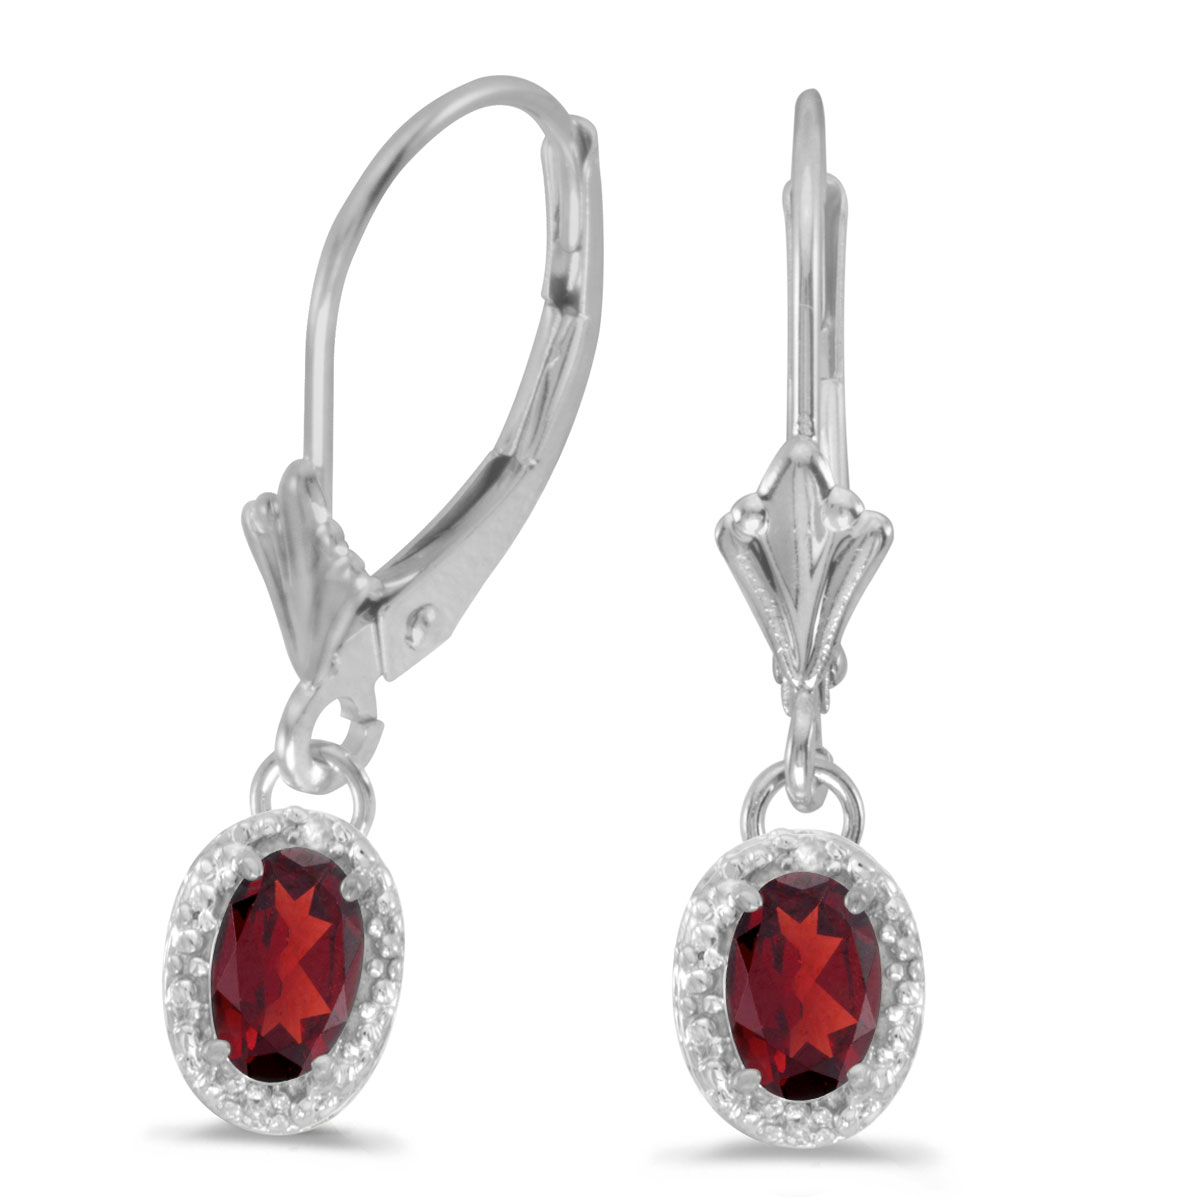 JCX2121: Beautiful 10k white gold leverback earrings with striking 6x4 mm garnets complemented with bright diamonds.